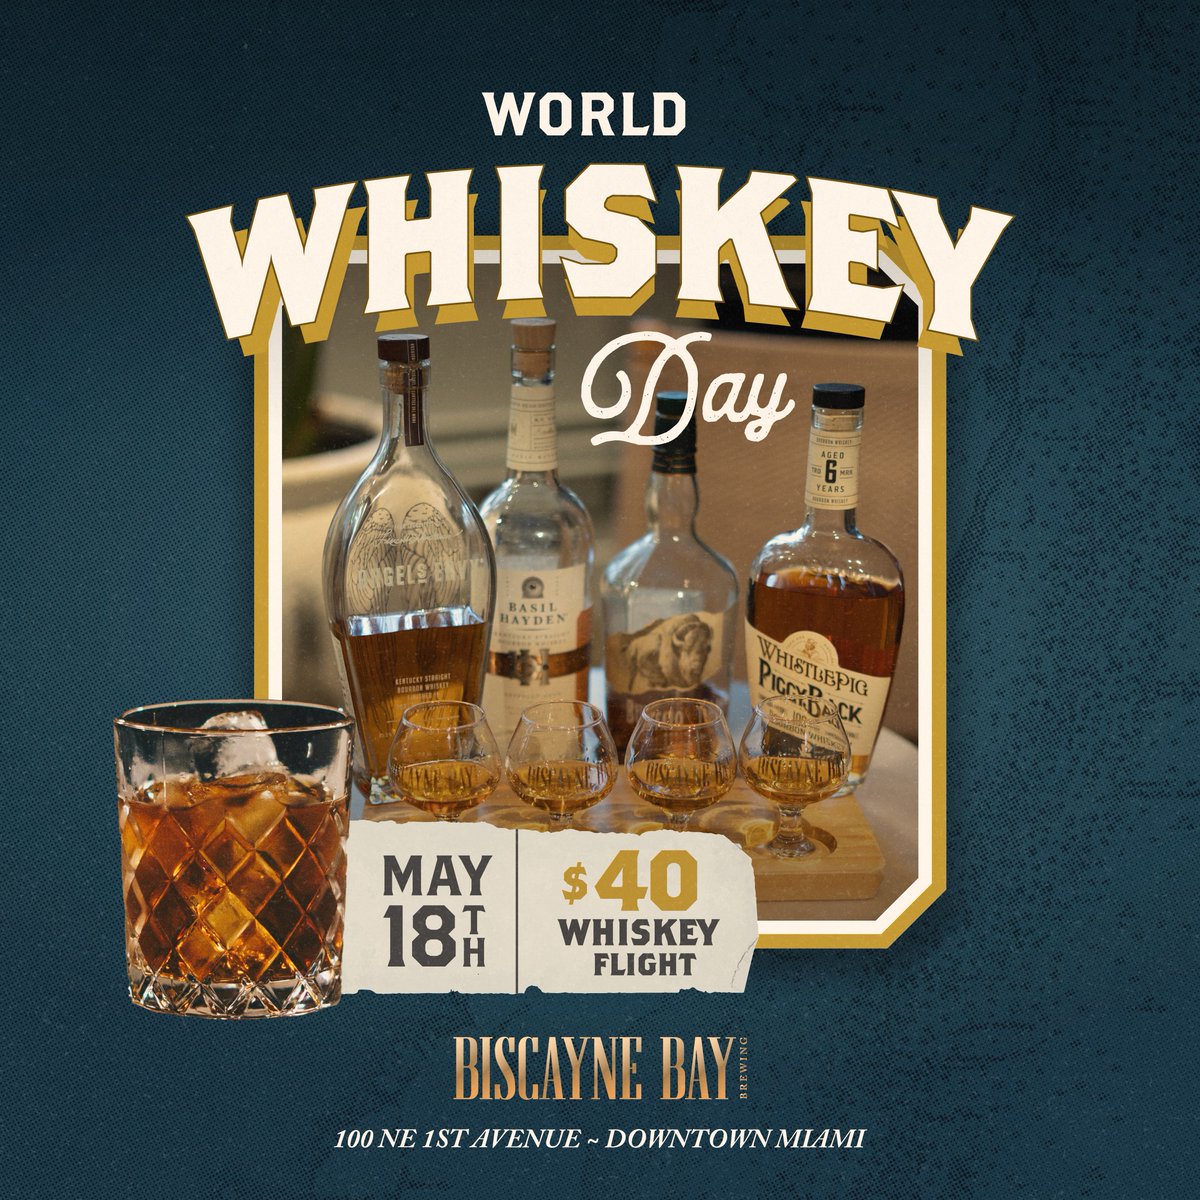 Mark your calendars because Whiskey Day is happening on the 18th! We have your favorite flights of whiskey ⬆️ Don't miss out! 🥃 #thingstodoinmiami #thingstodoindowntownmiami #HappyHourMiami #brickellliving #downtownmiami #thingstodoinbrickell